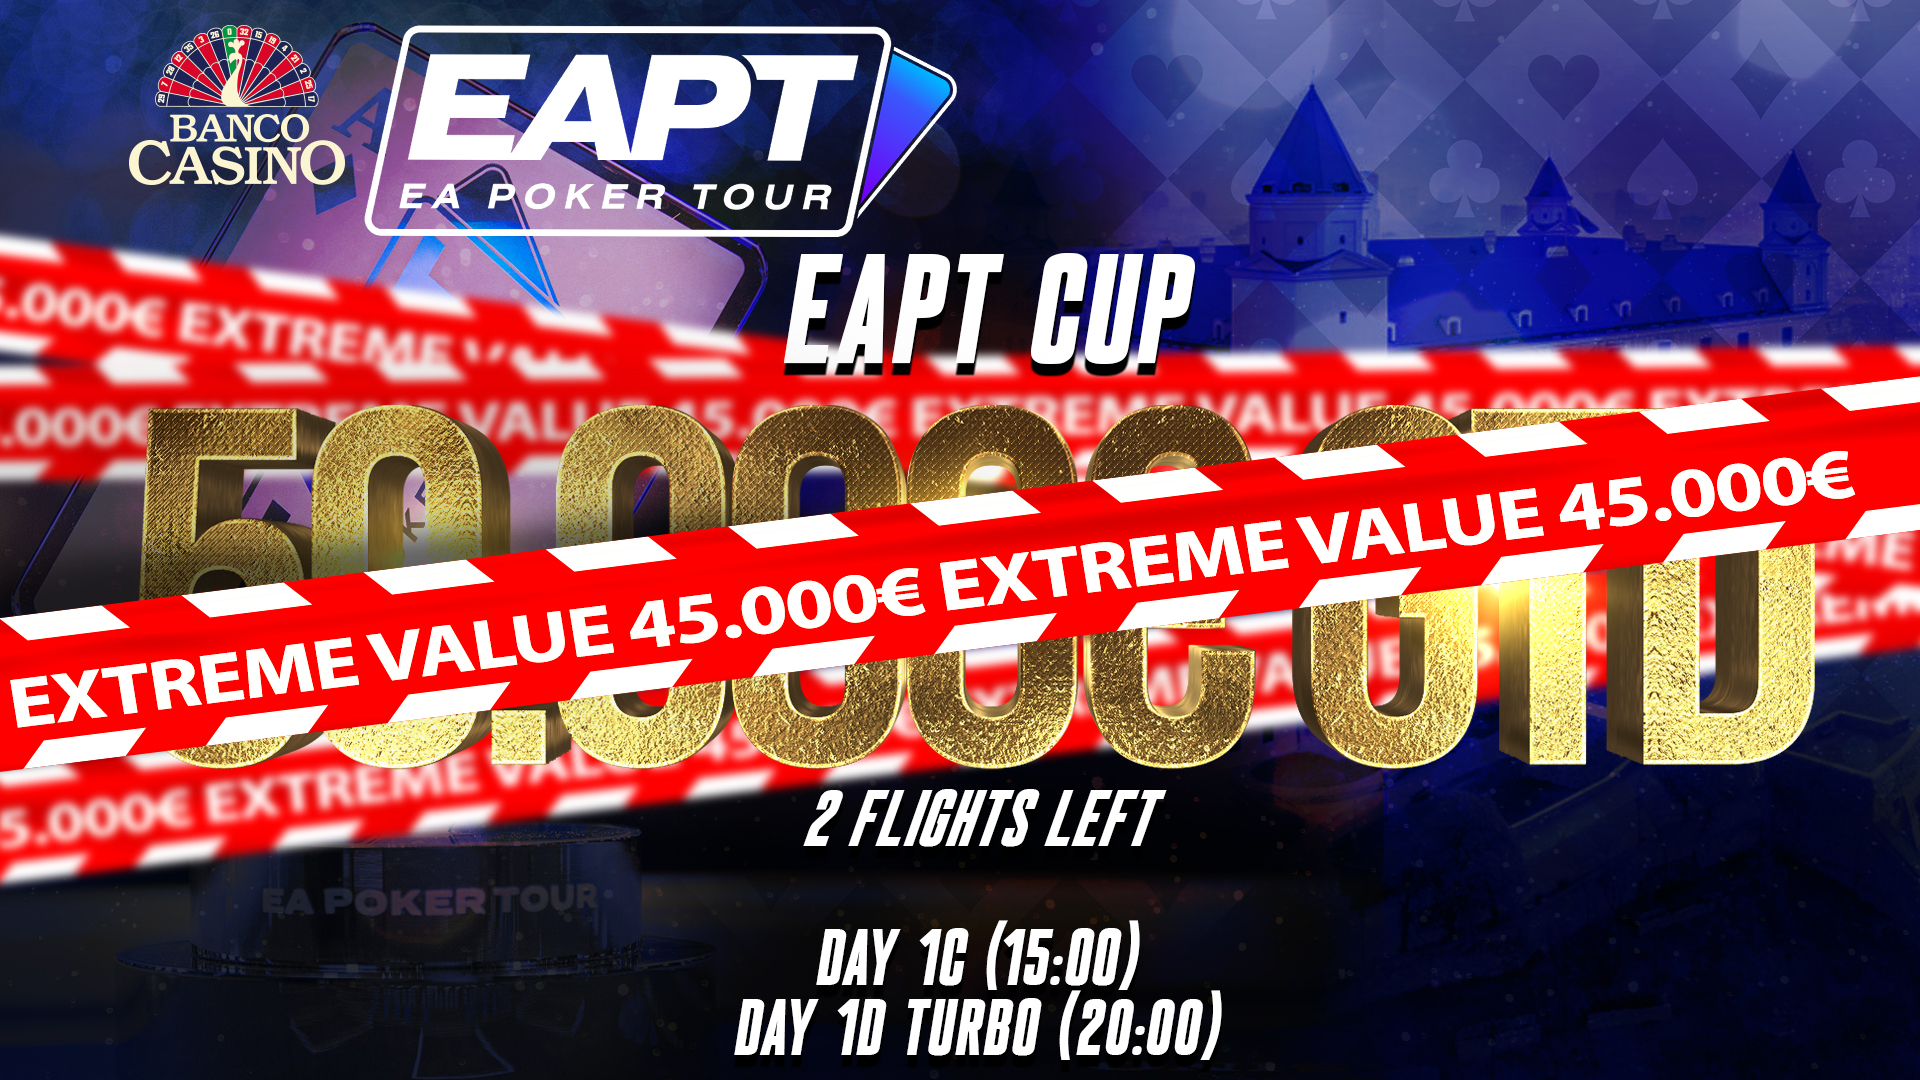 The last 2 flights in the EAPT Cup and an extreme €45,000 OVERLAY!